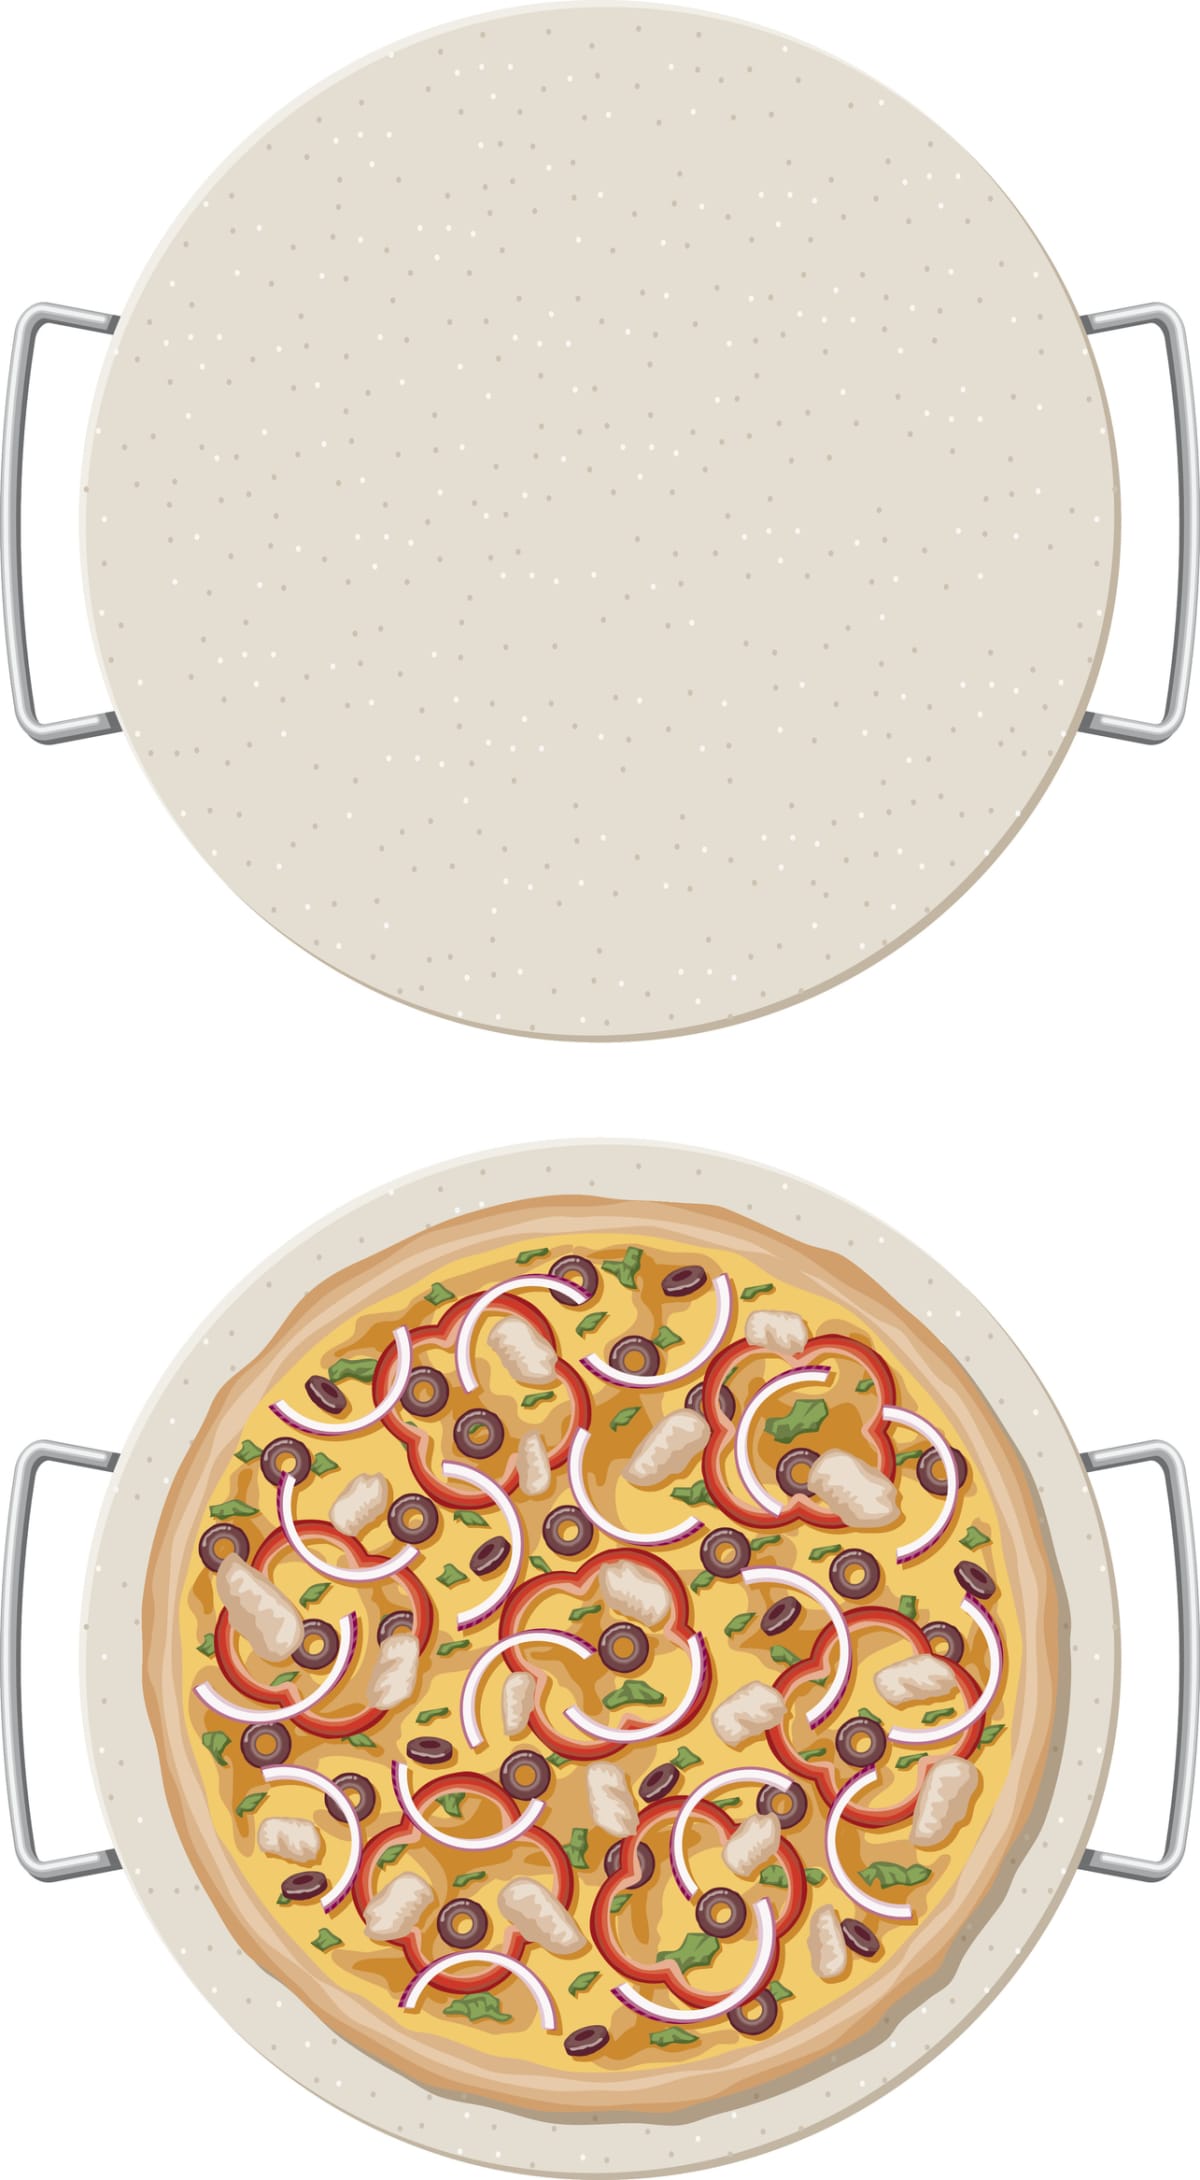 An overhead view of a pizza baked on a ceramic pizza stone isolated on white. Also includes the stone on its own with no pizza on top. File contains no gradients or transparencies. Shapes are grouped and layered.